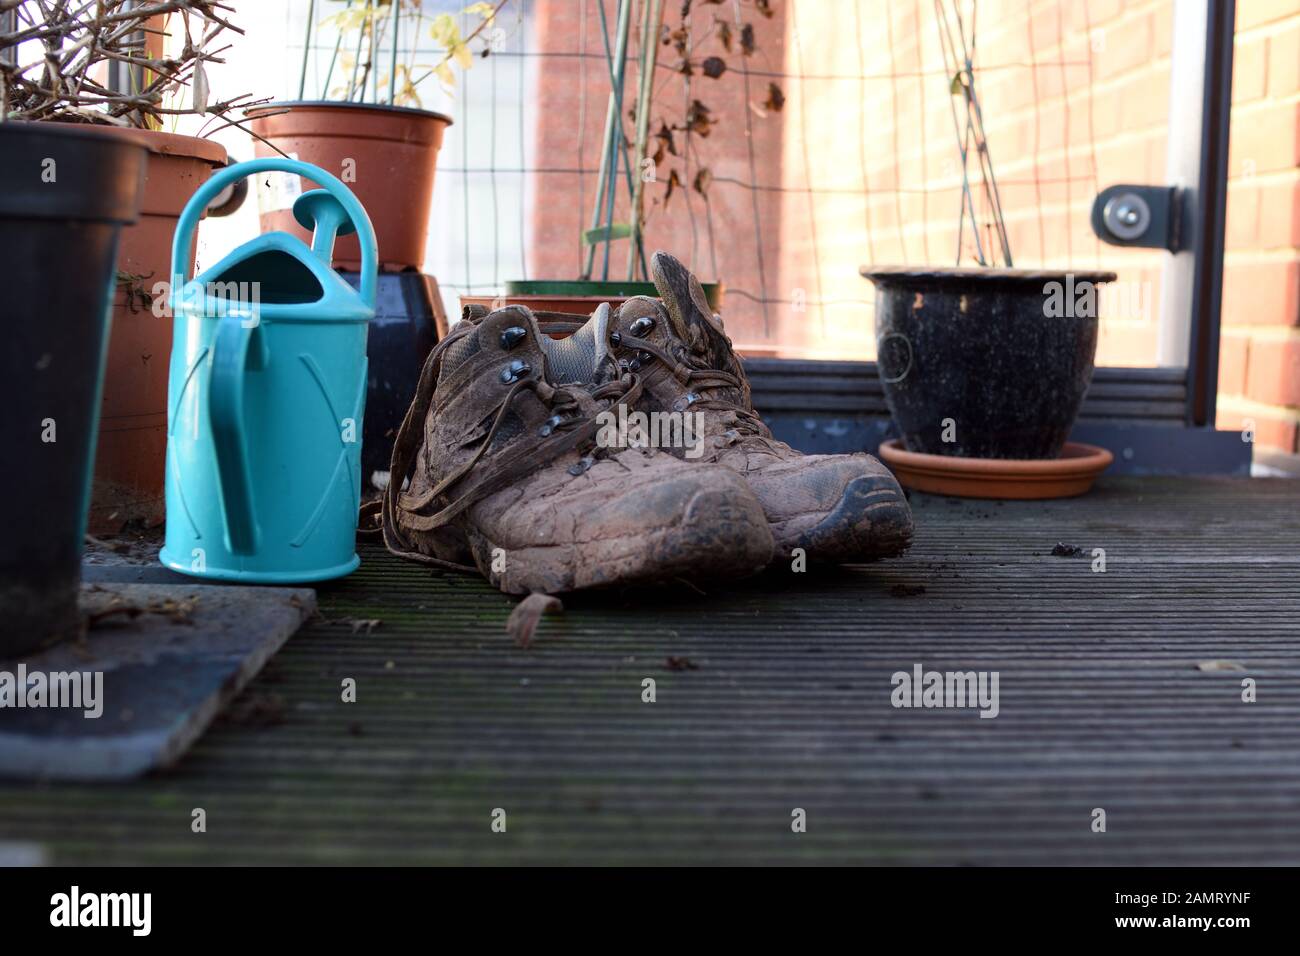 Muddy boots for gardening next to plastic turquoise watering can on a balcony Stock Photo